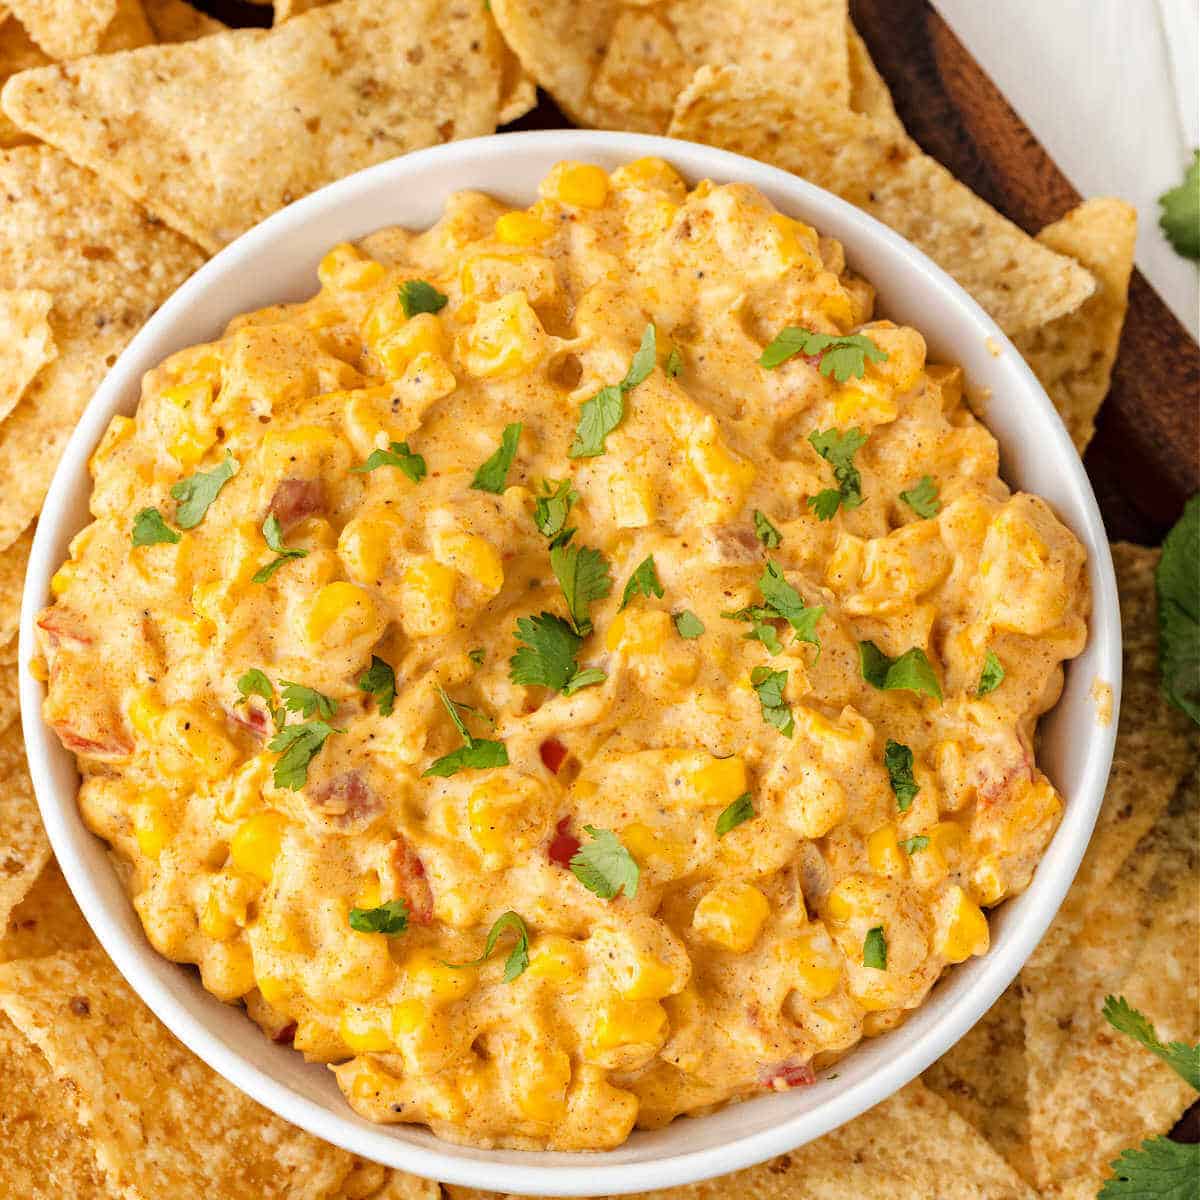 Corn dip on a platter with tortilla chips on a table.